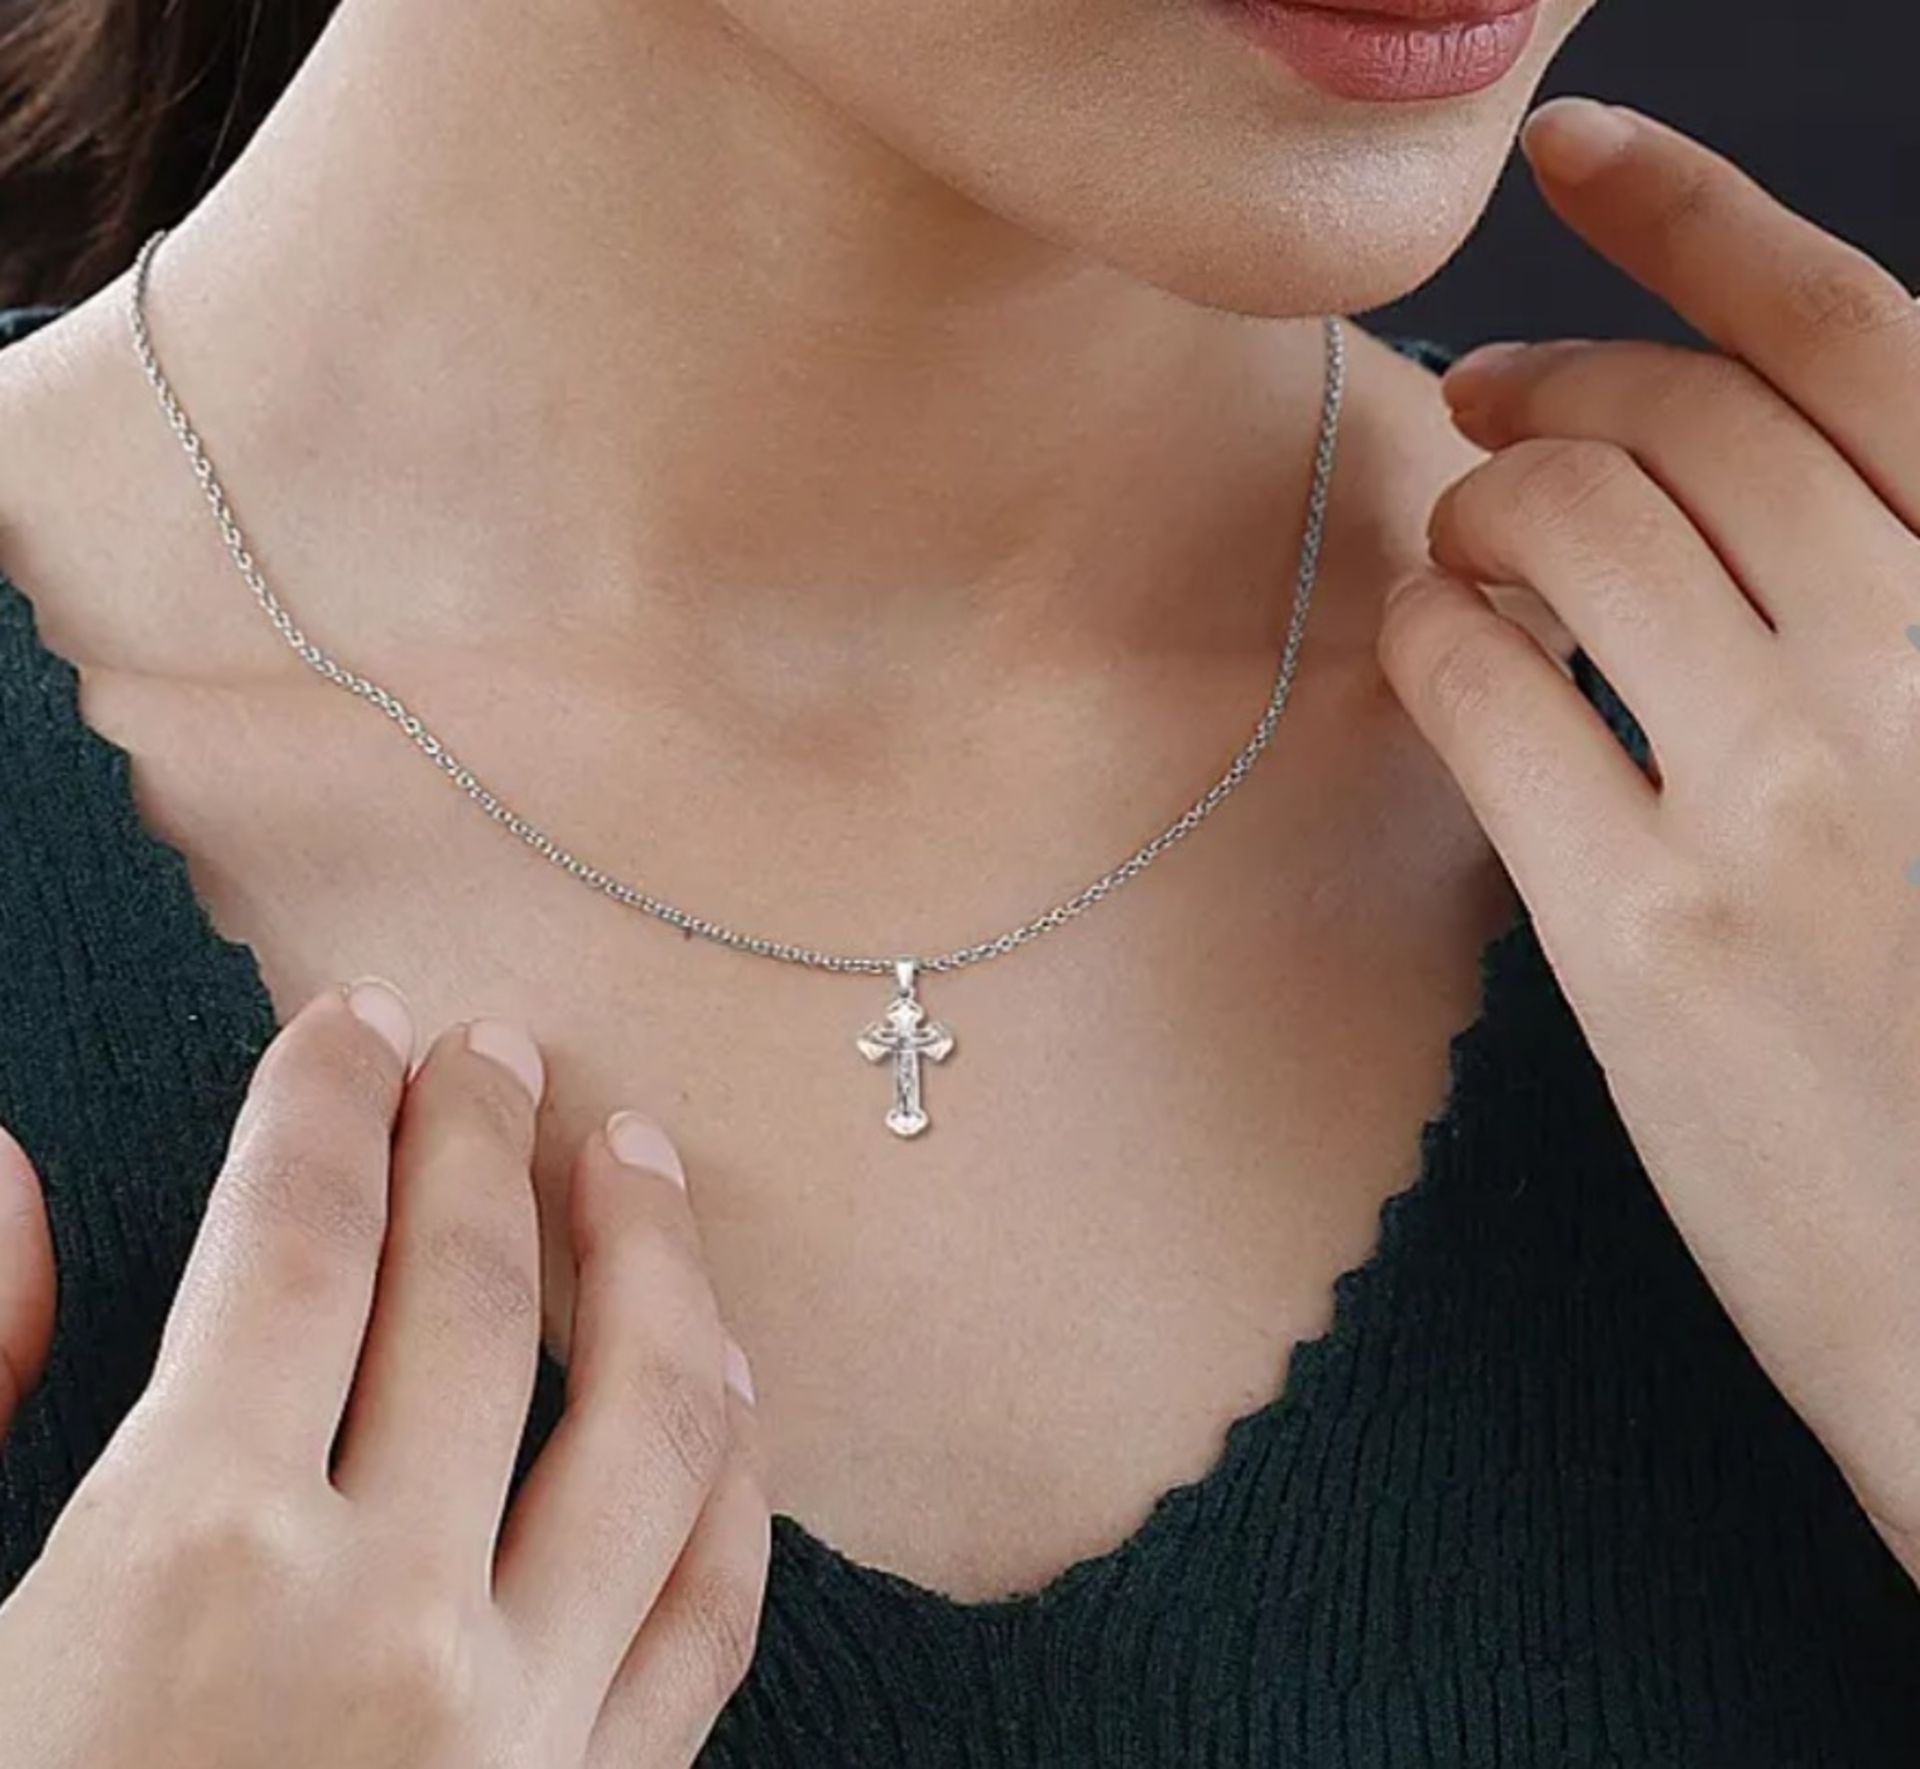 New! Sterling Silver Cross Pendant with Chain - Image 2 of 5